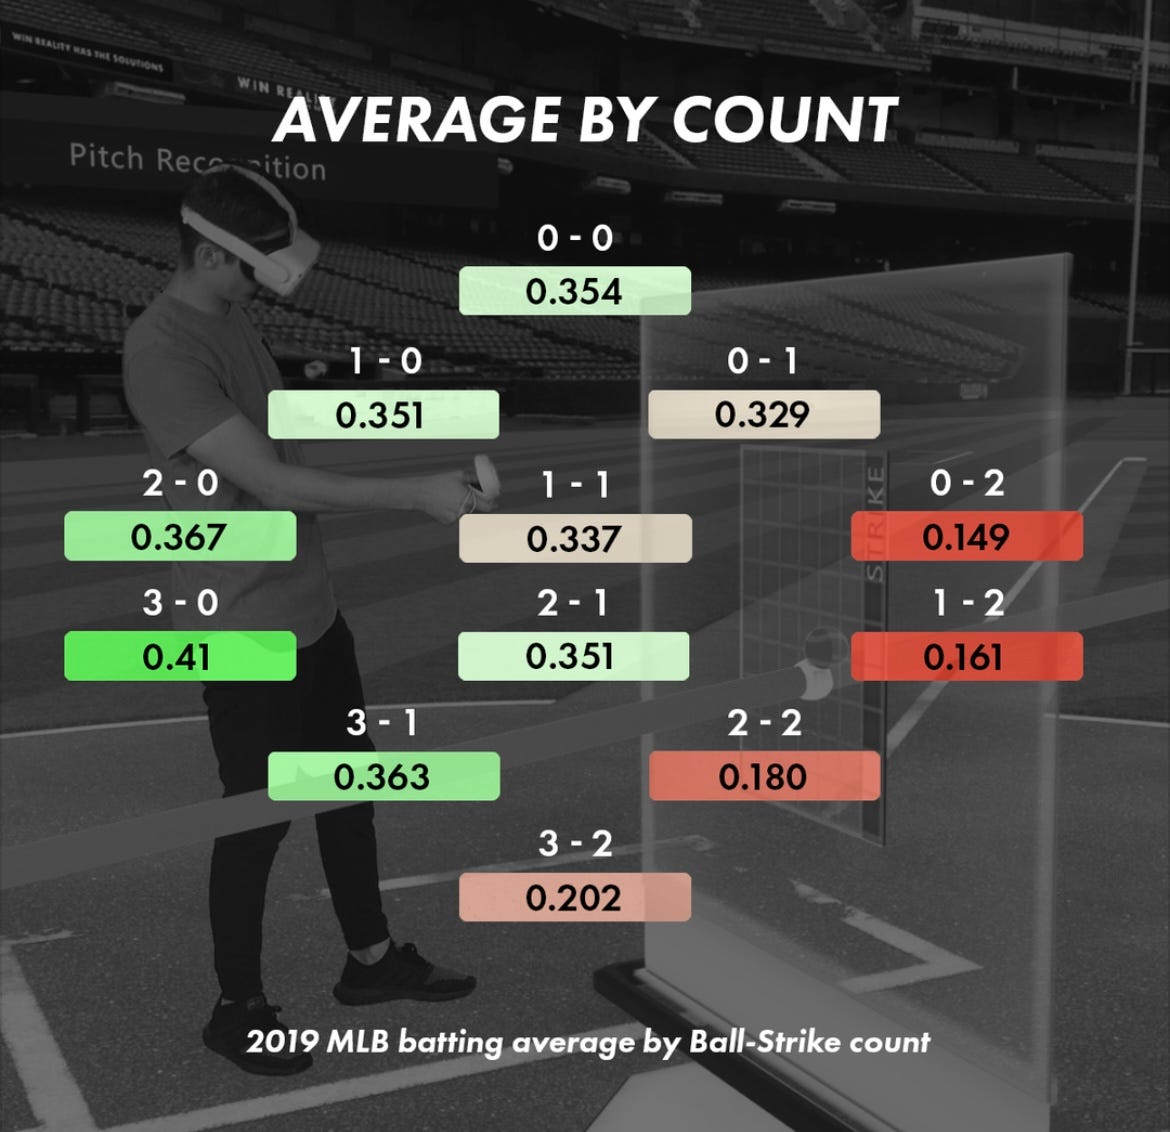 Teach Hitting Approach Based on the Count by Kevin Burke